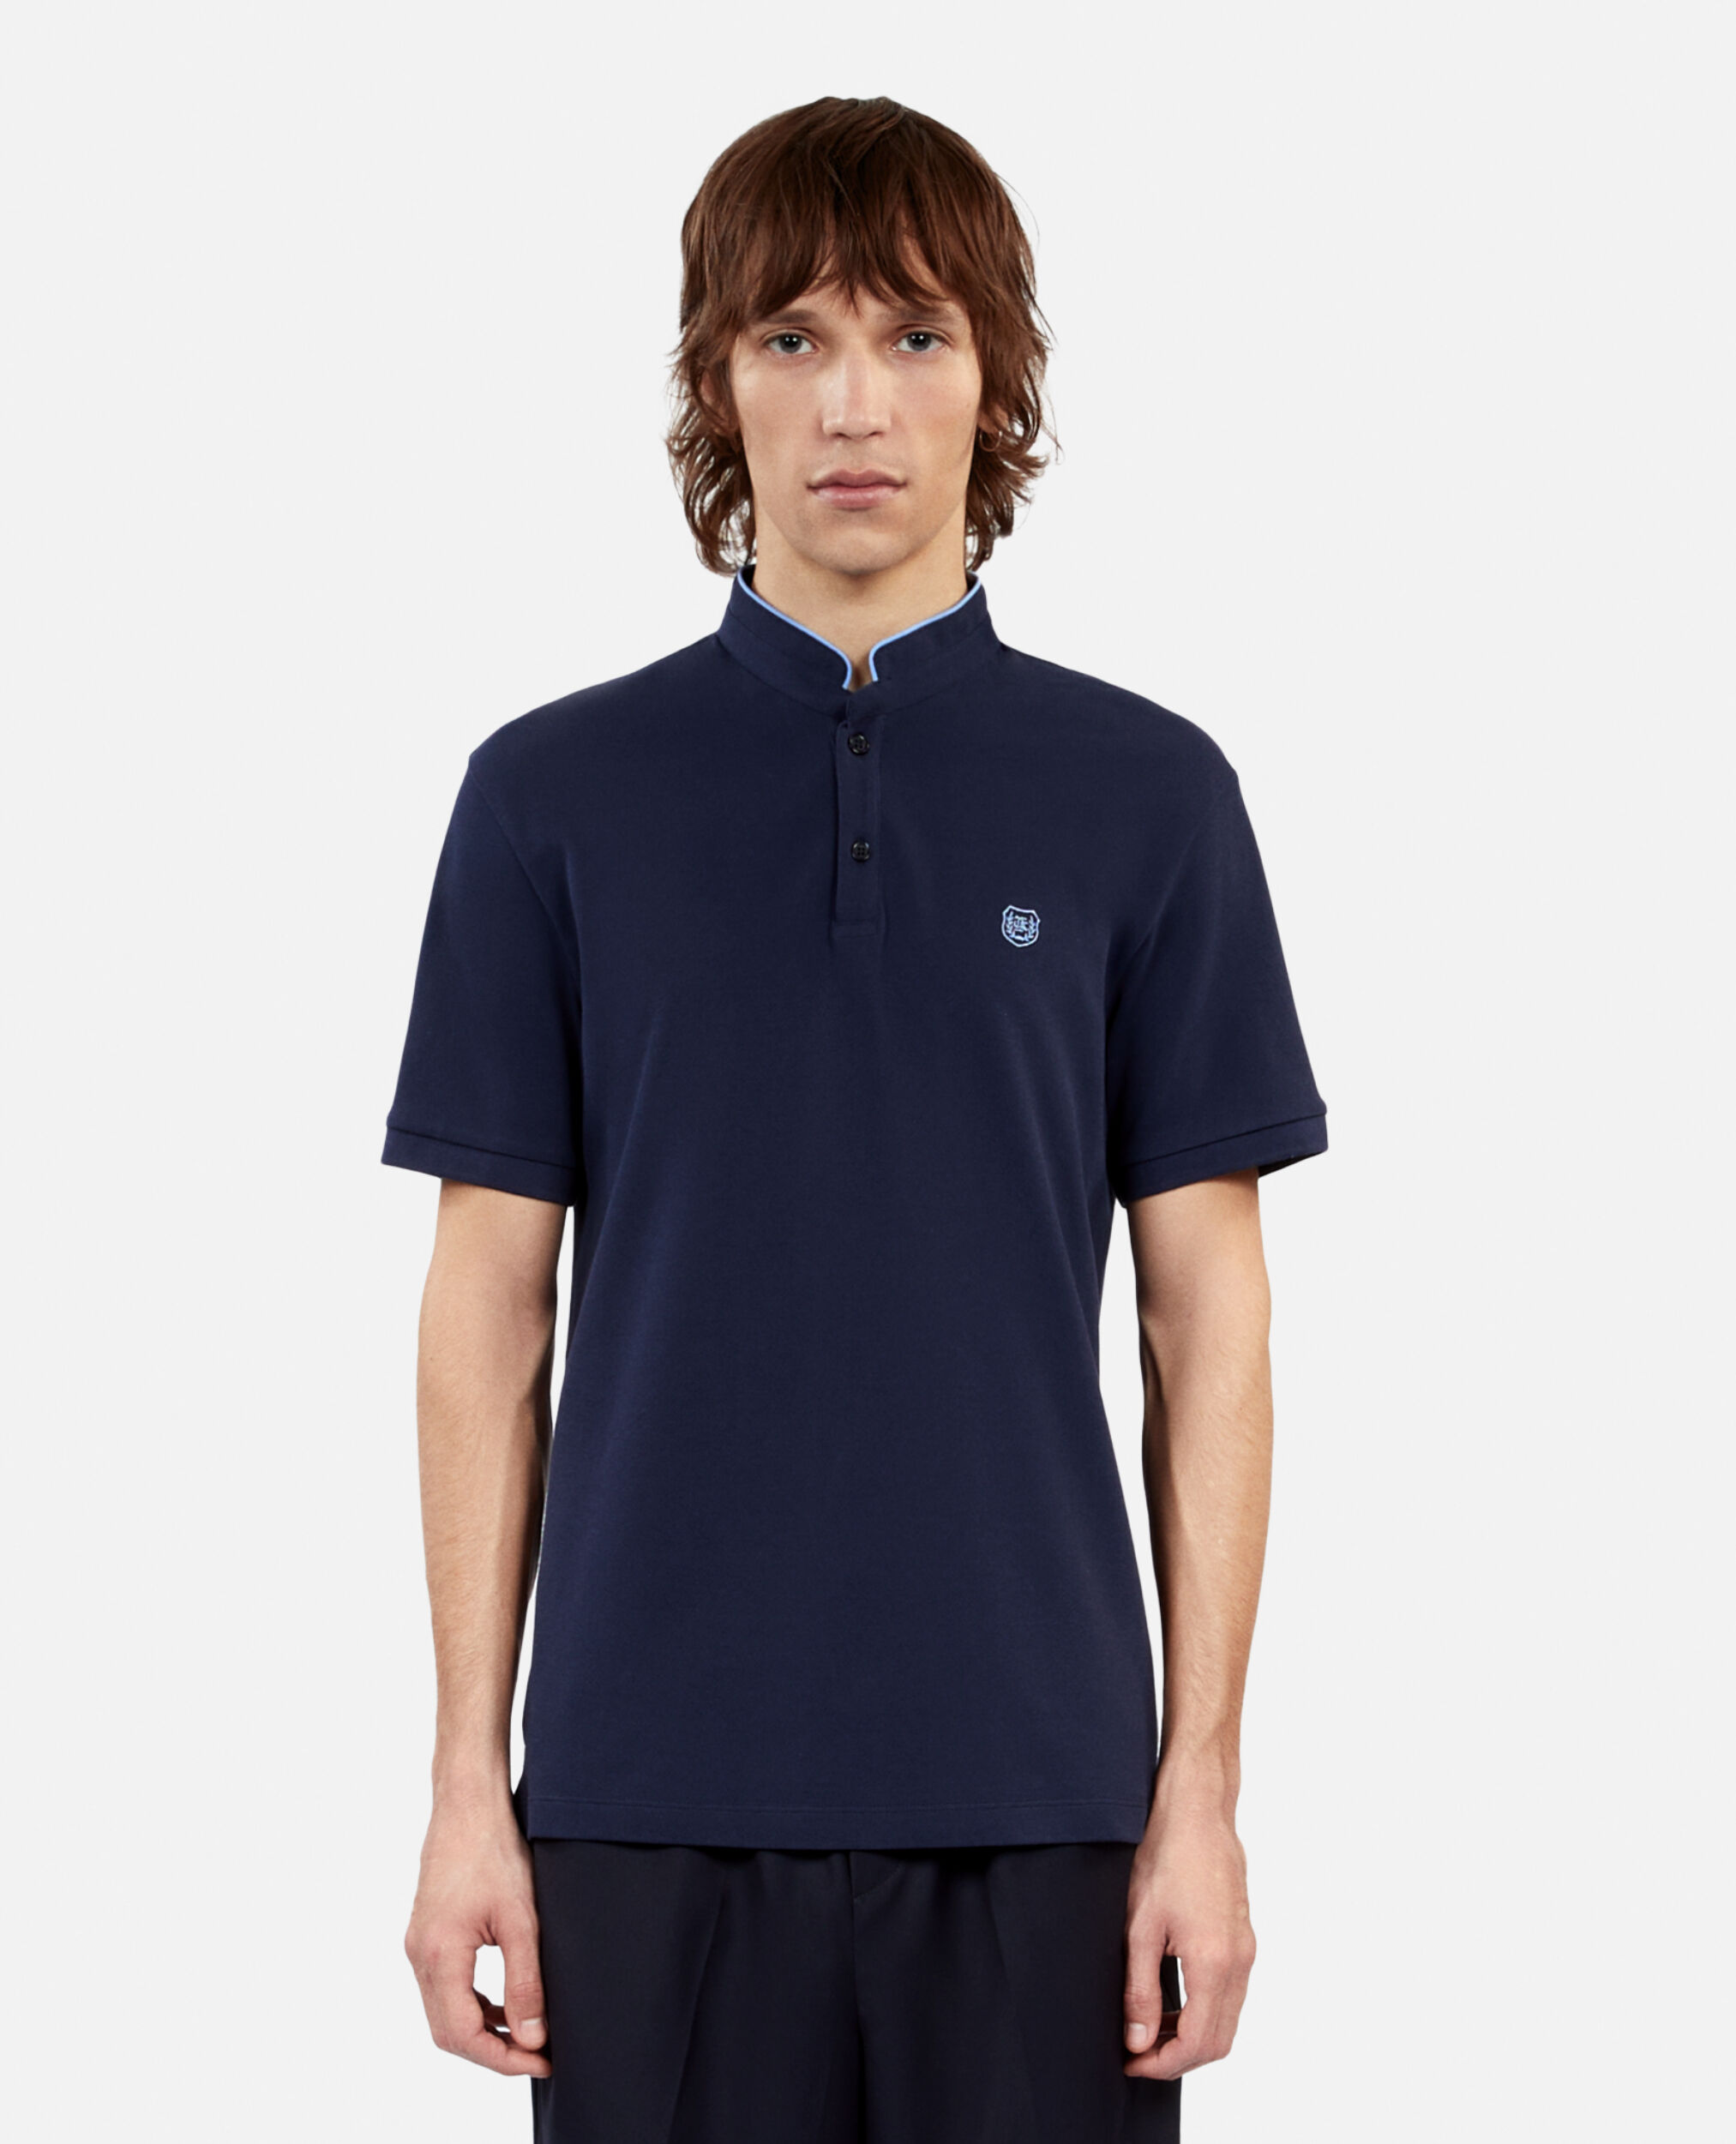 Navy blue pique cotton polo t-shirt, NAVY/ PIPING NAVY, hi-res image number null